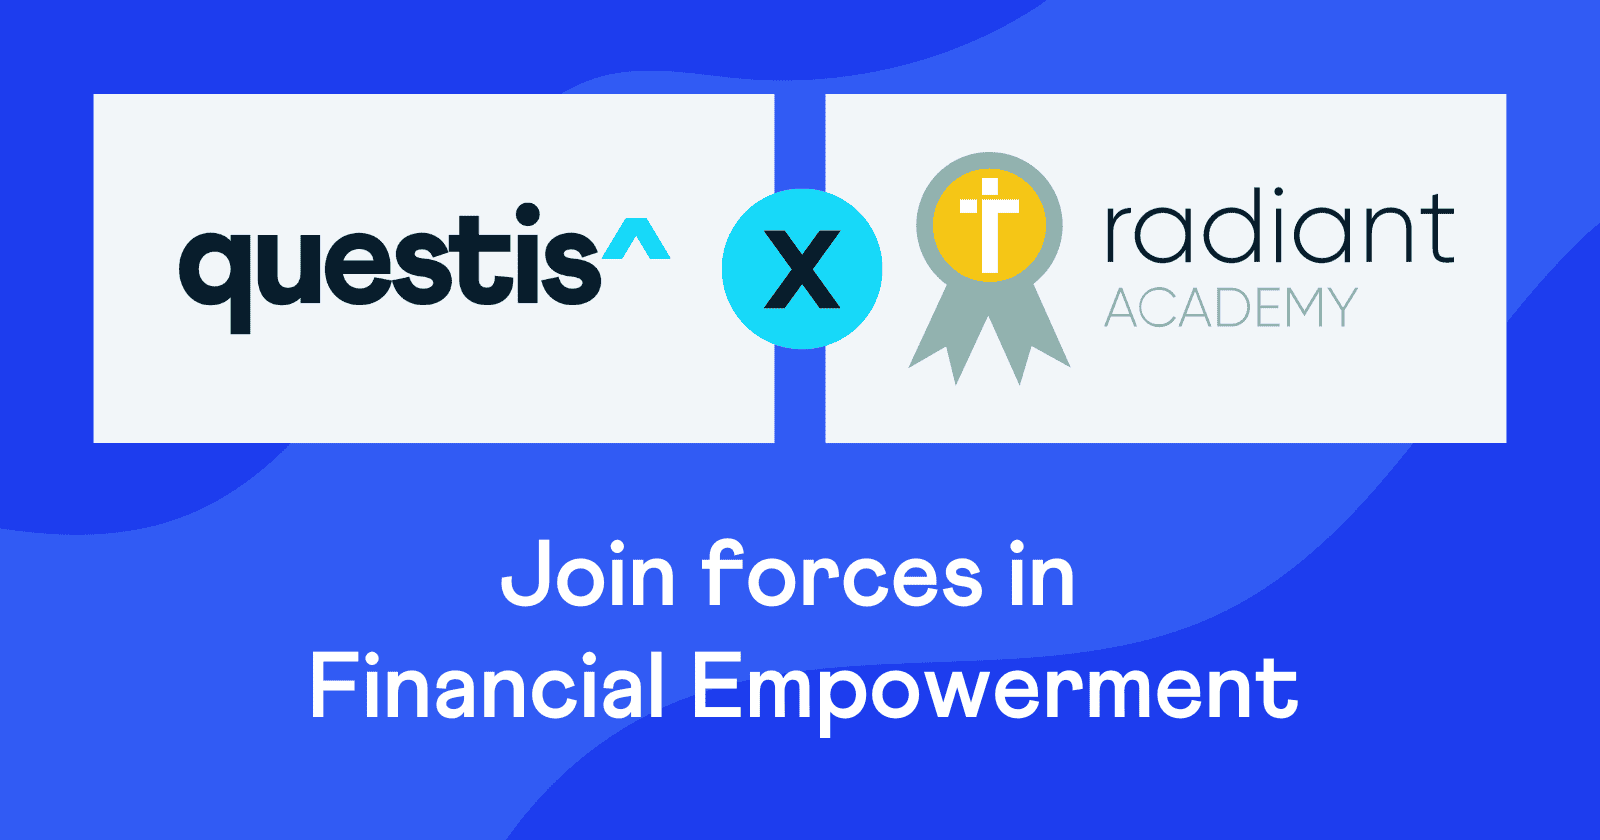 Questis x Radiant Academy Join Forces in Financial Empowerment